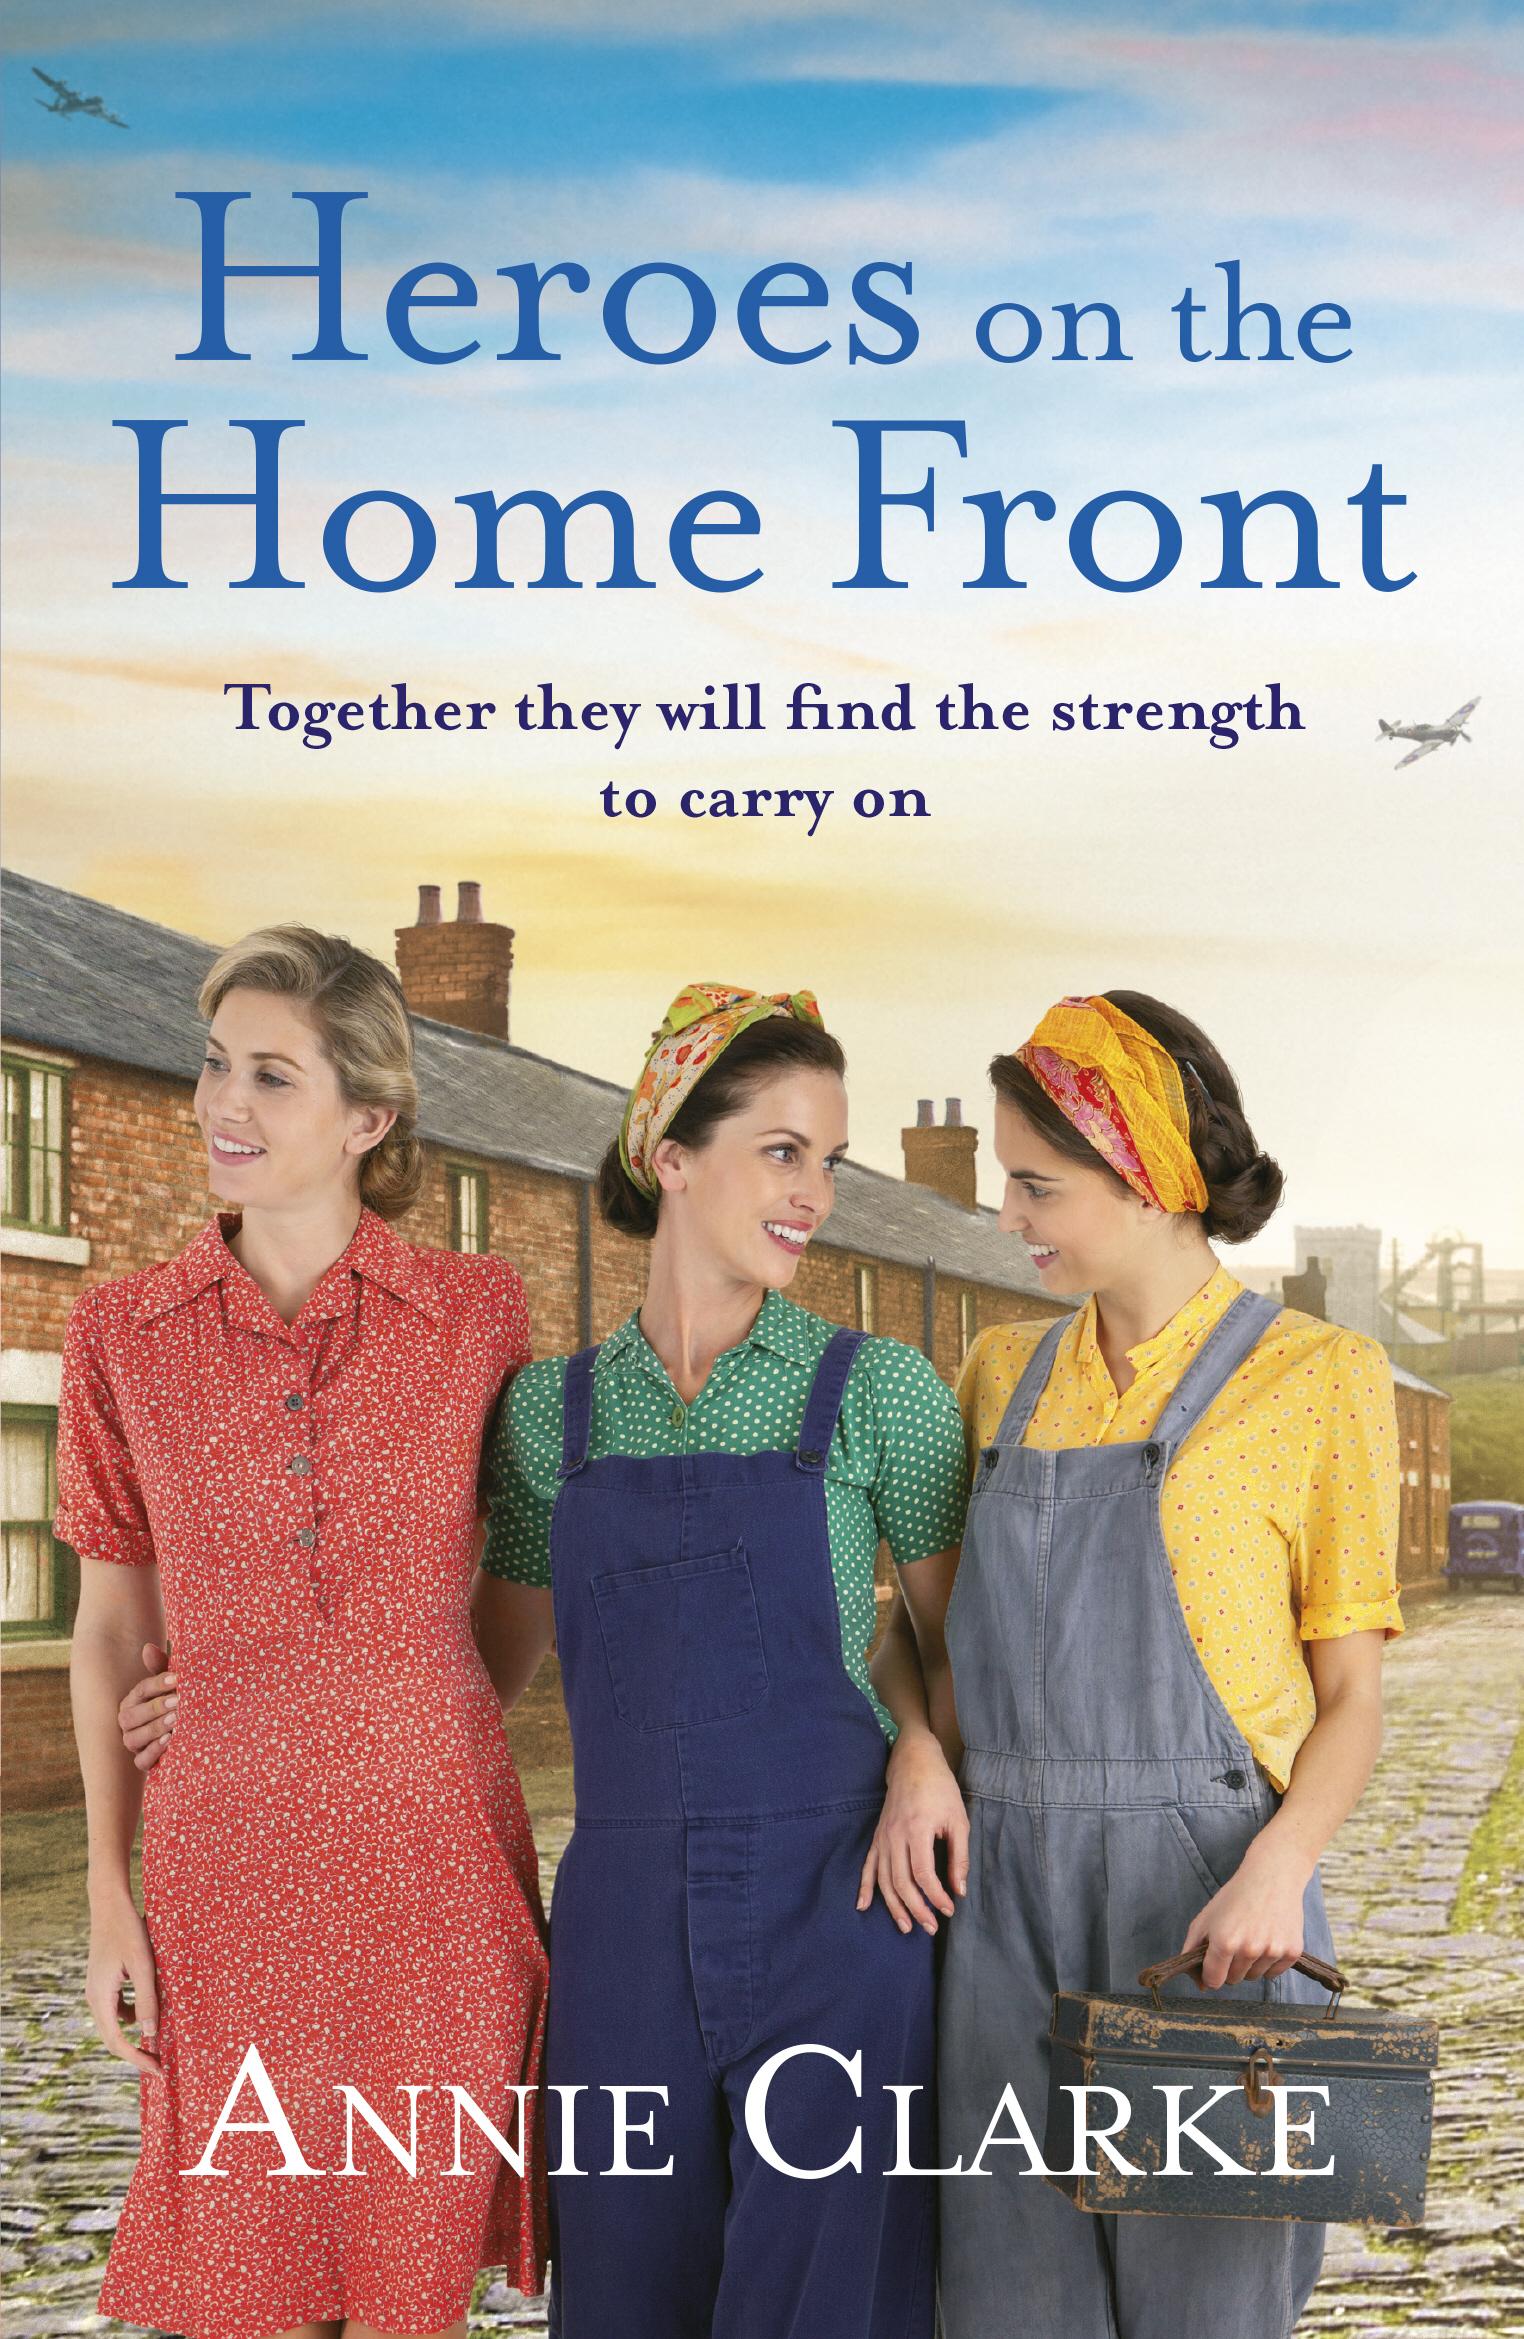 Heroes on the Home Front - Annie Clarke